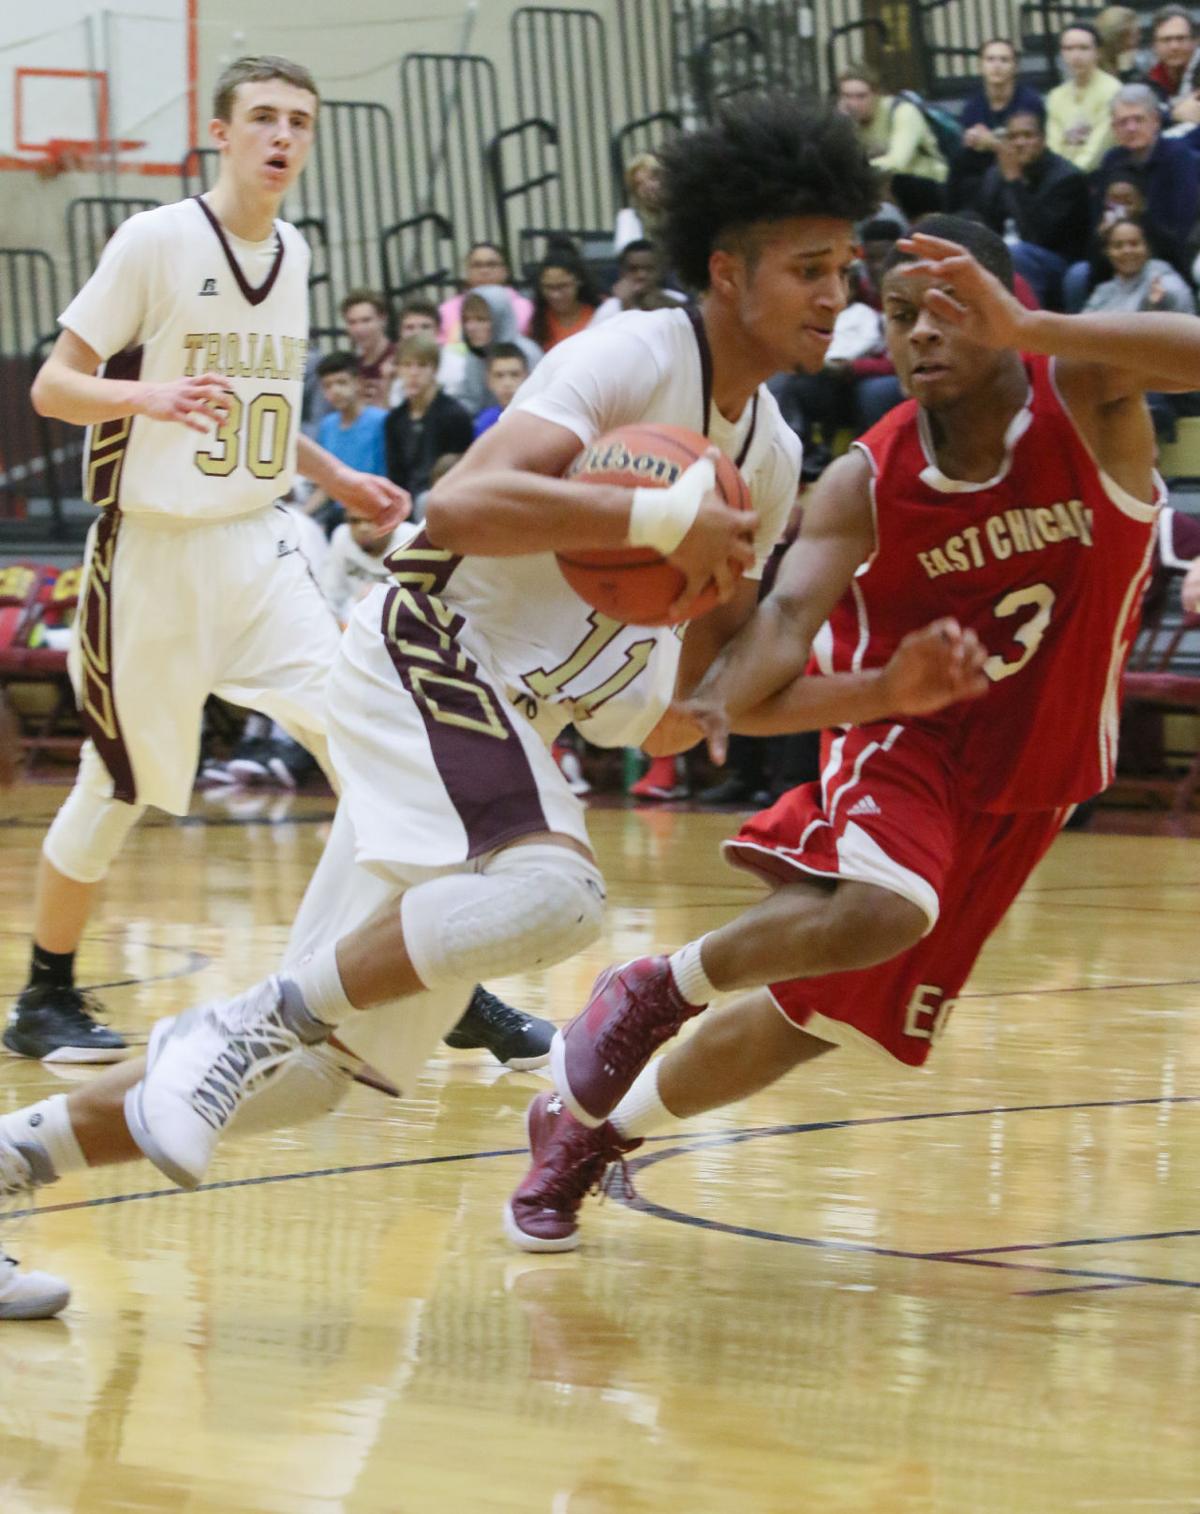 East Chicago Central at Chesterton boys hoops